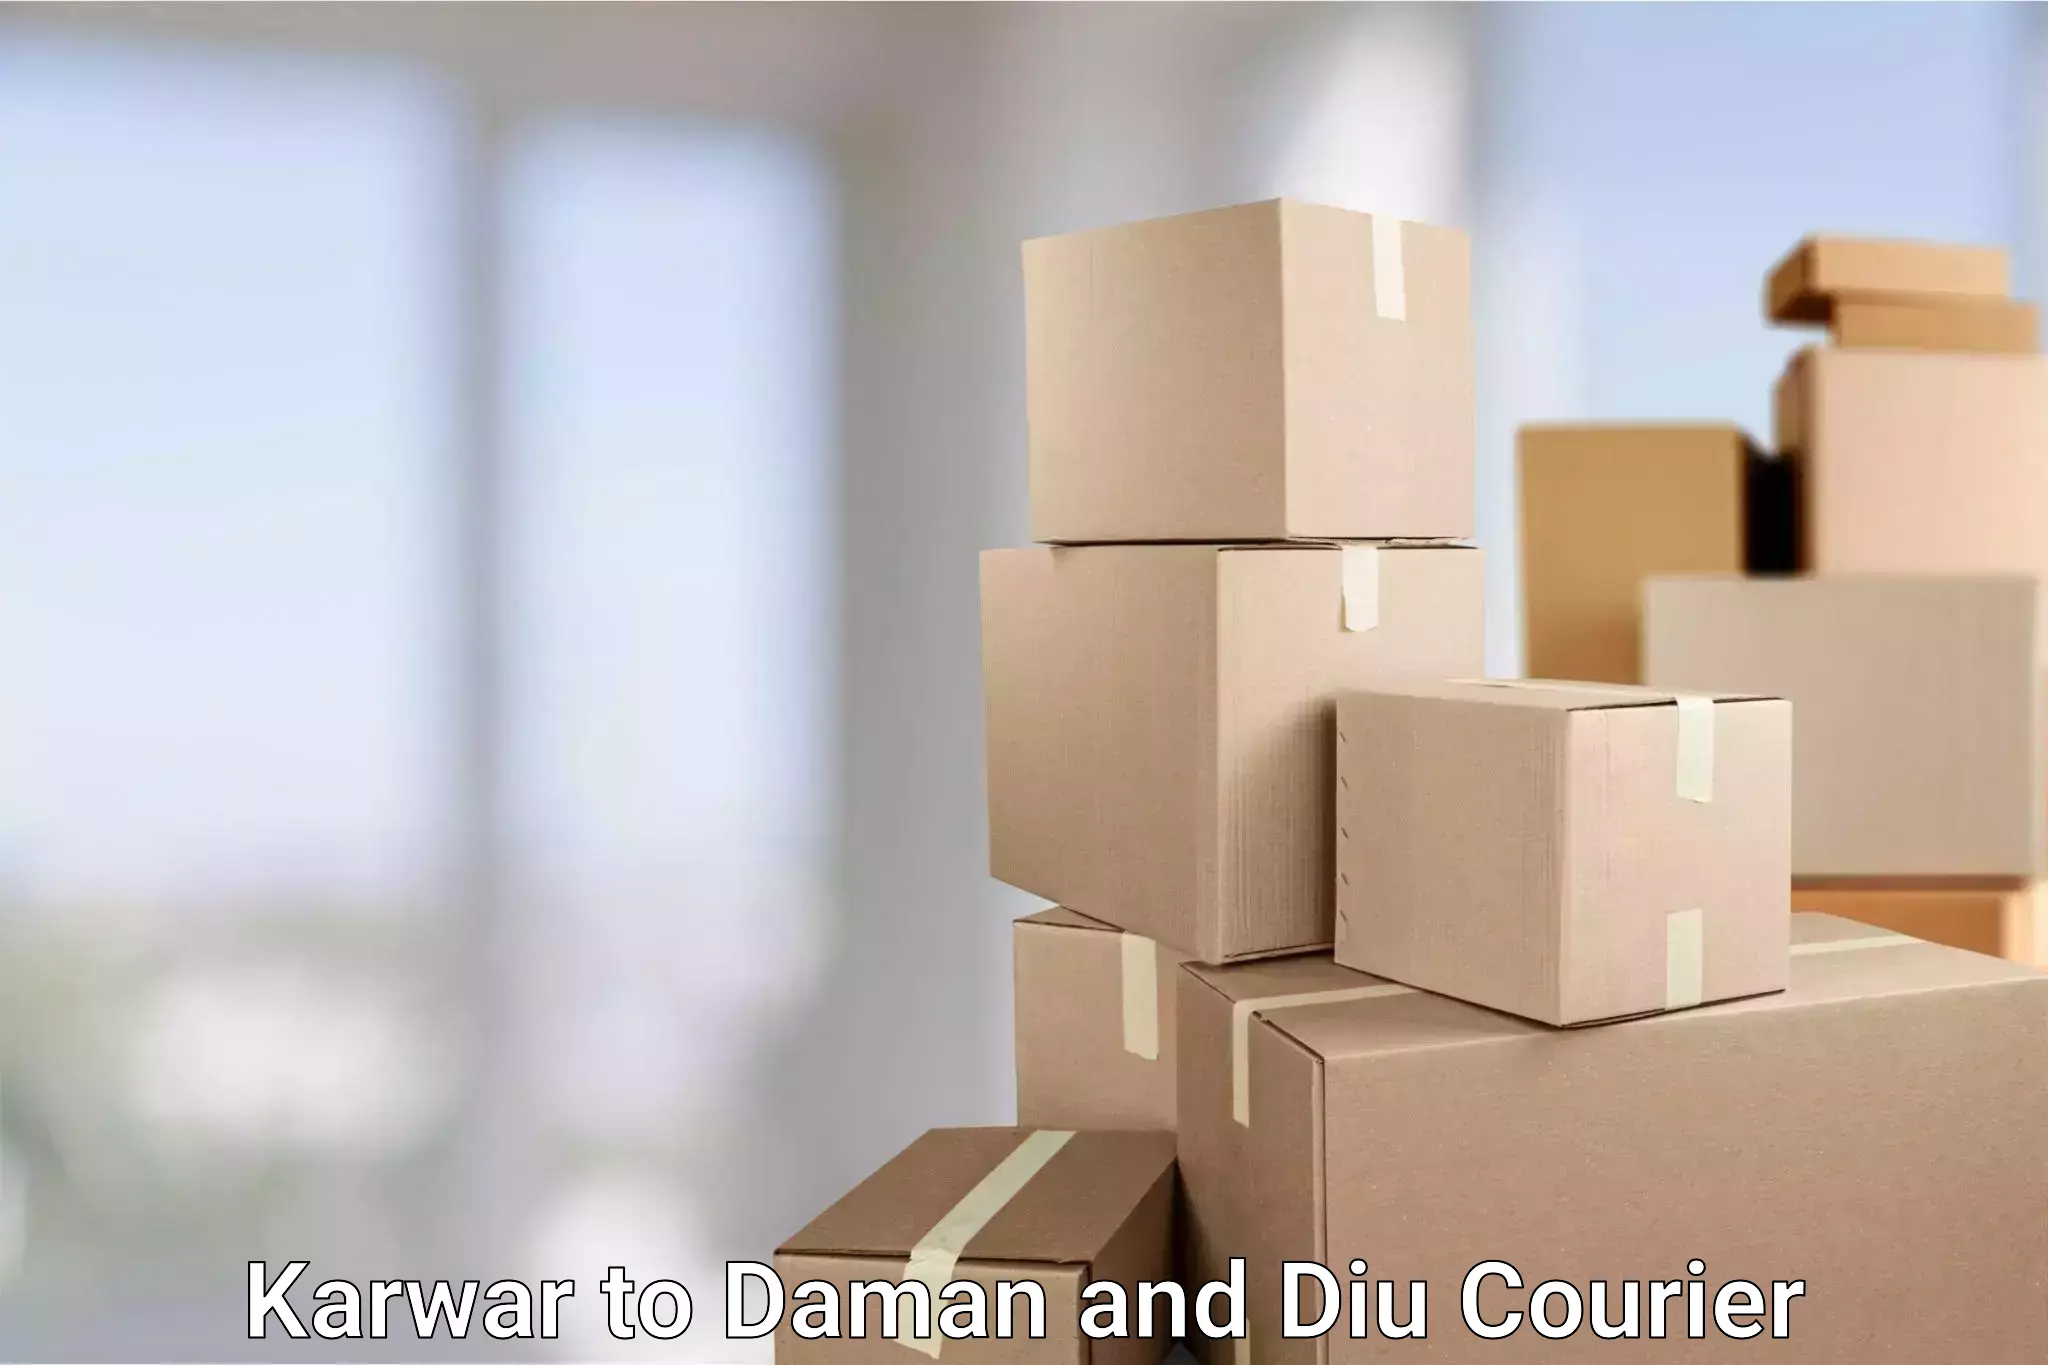 Flexible delivery schedules Karwar to Daman and Diu